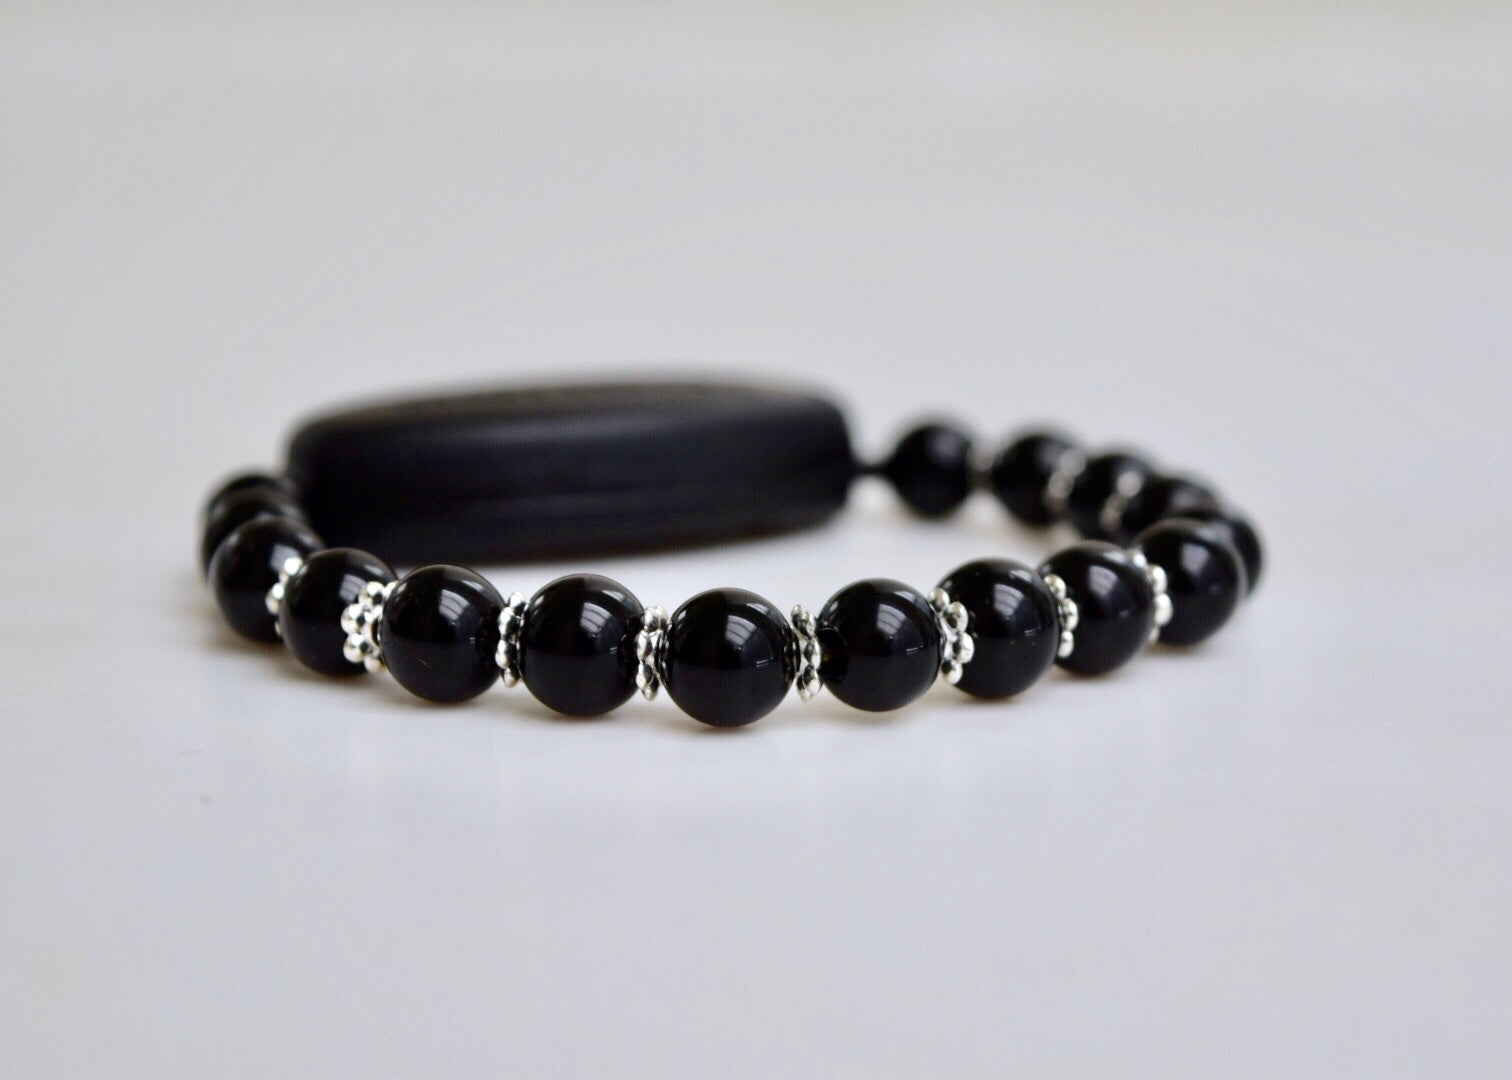 Polished Black Onyx - With Tibet Silver Daisy Spacers